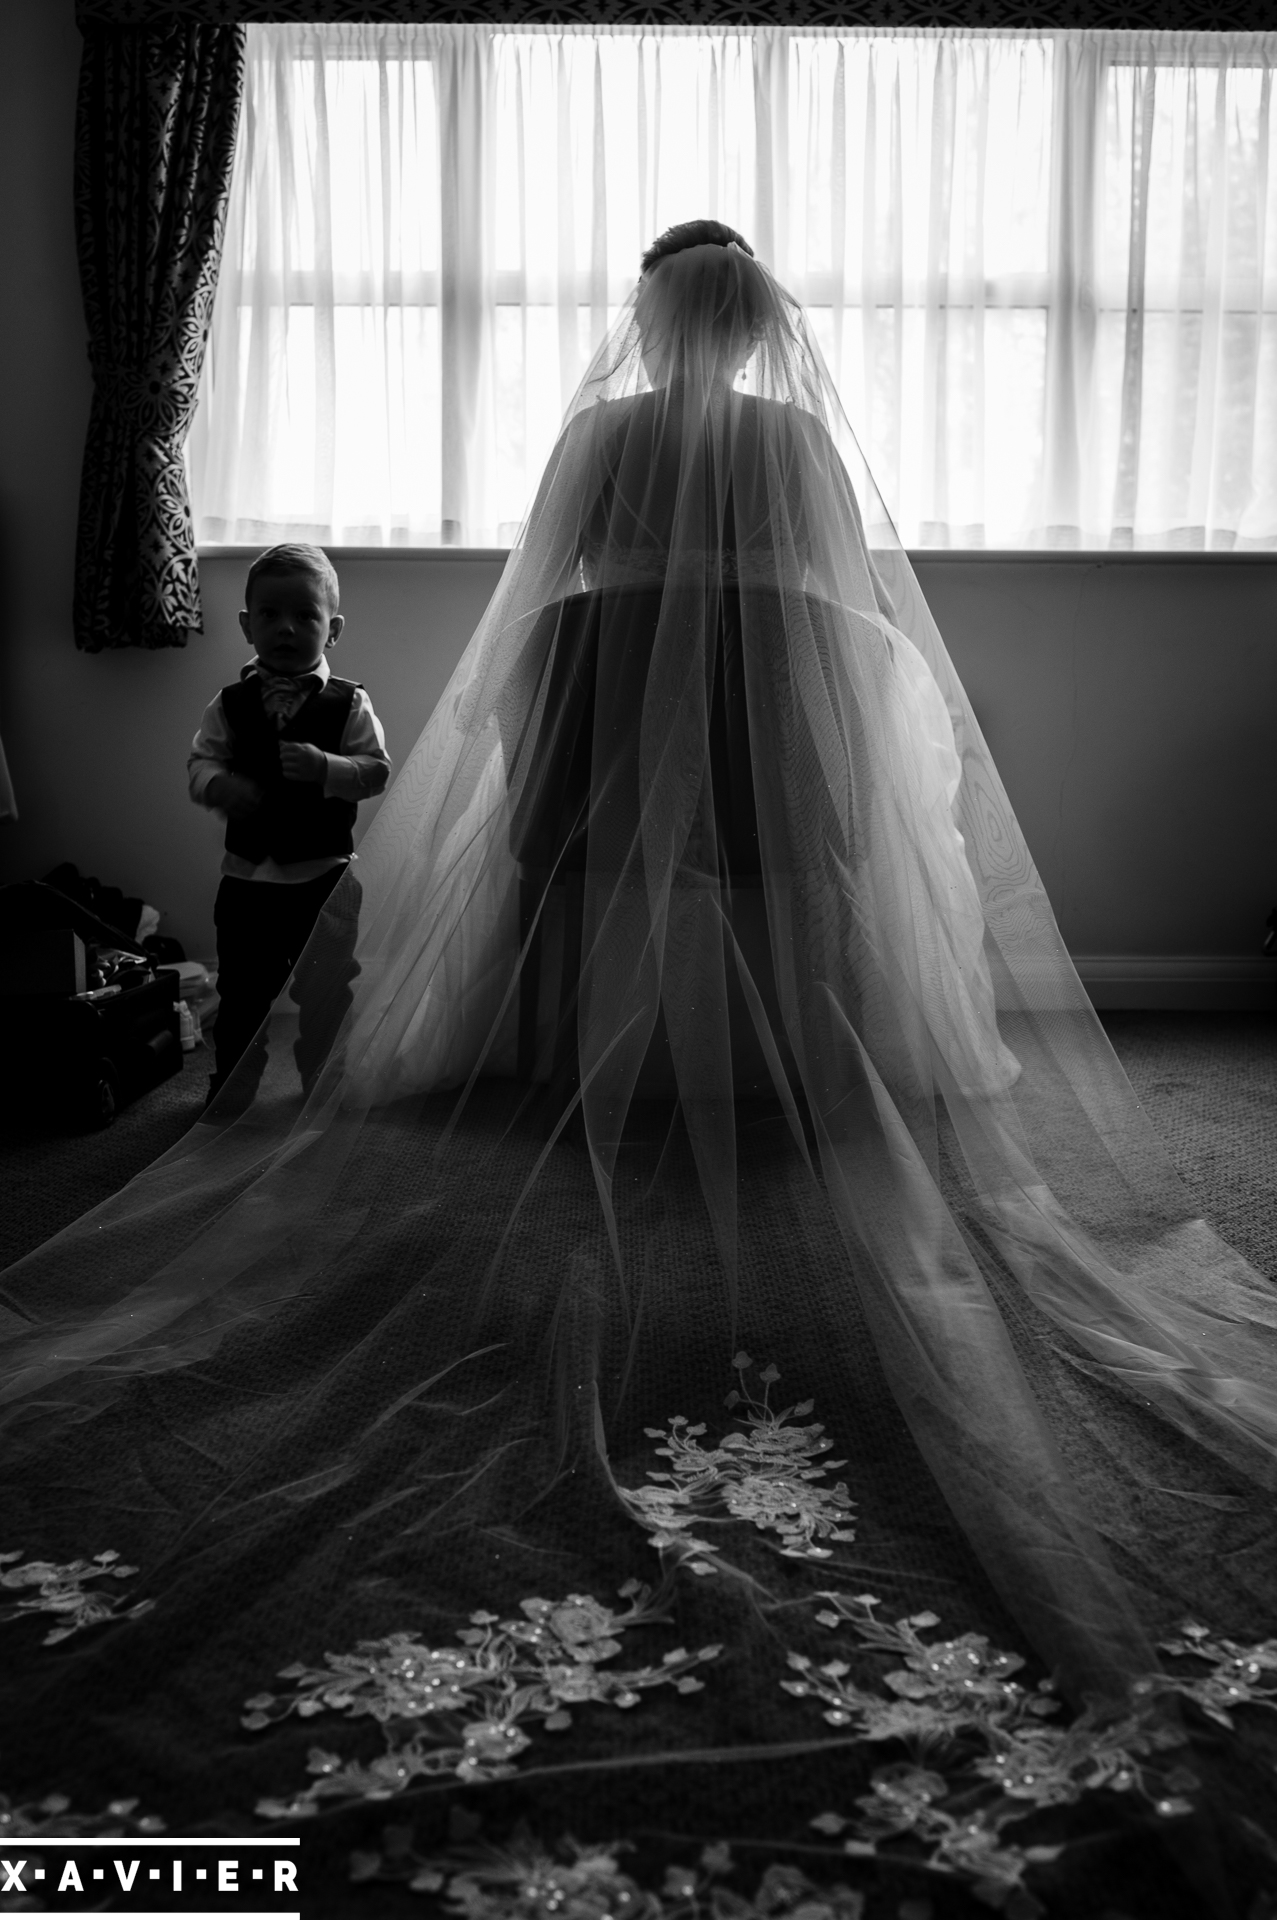 brides veil is laid out behind her